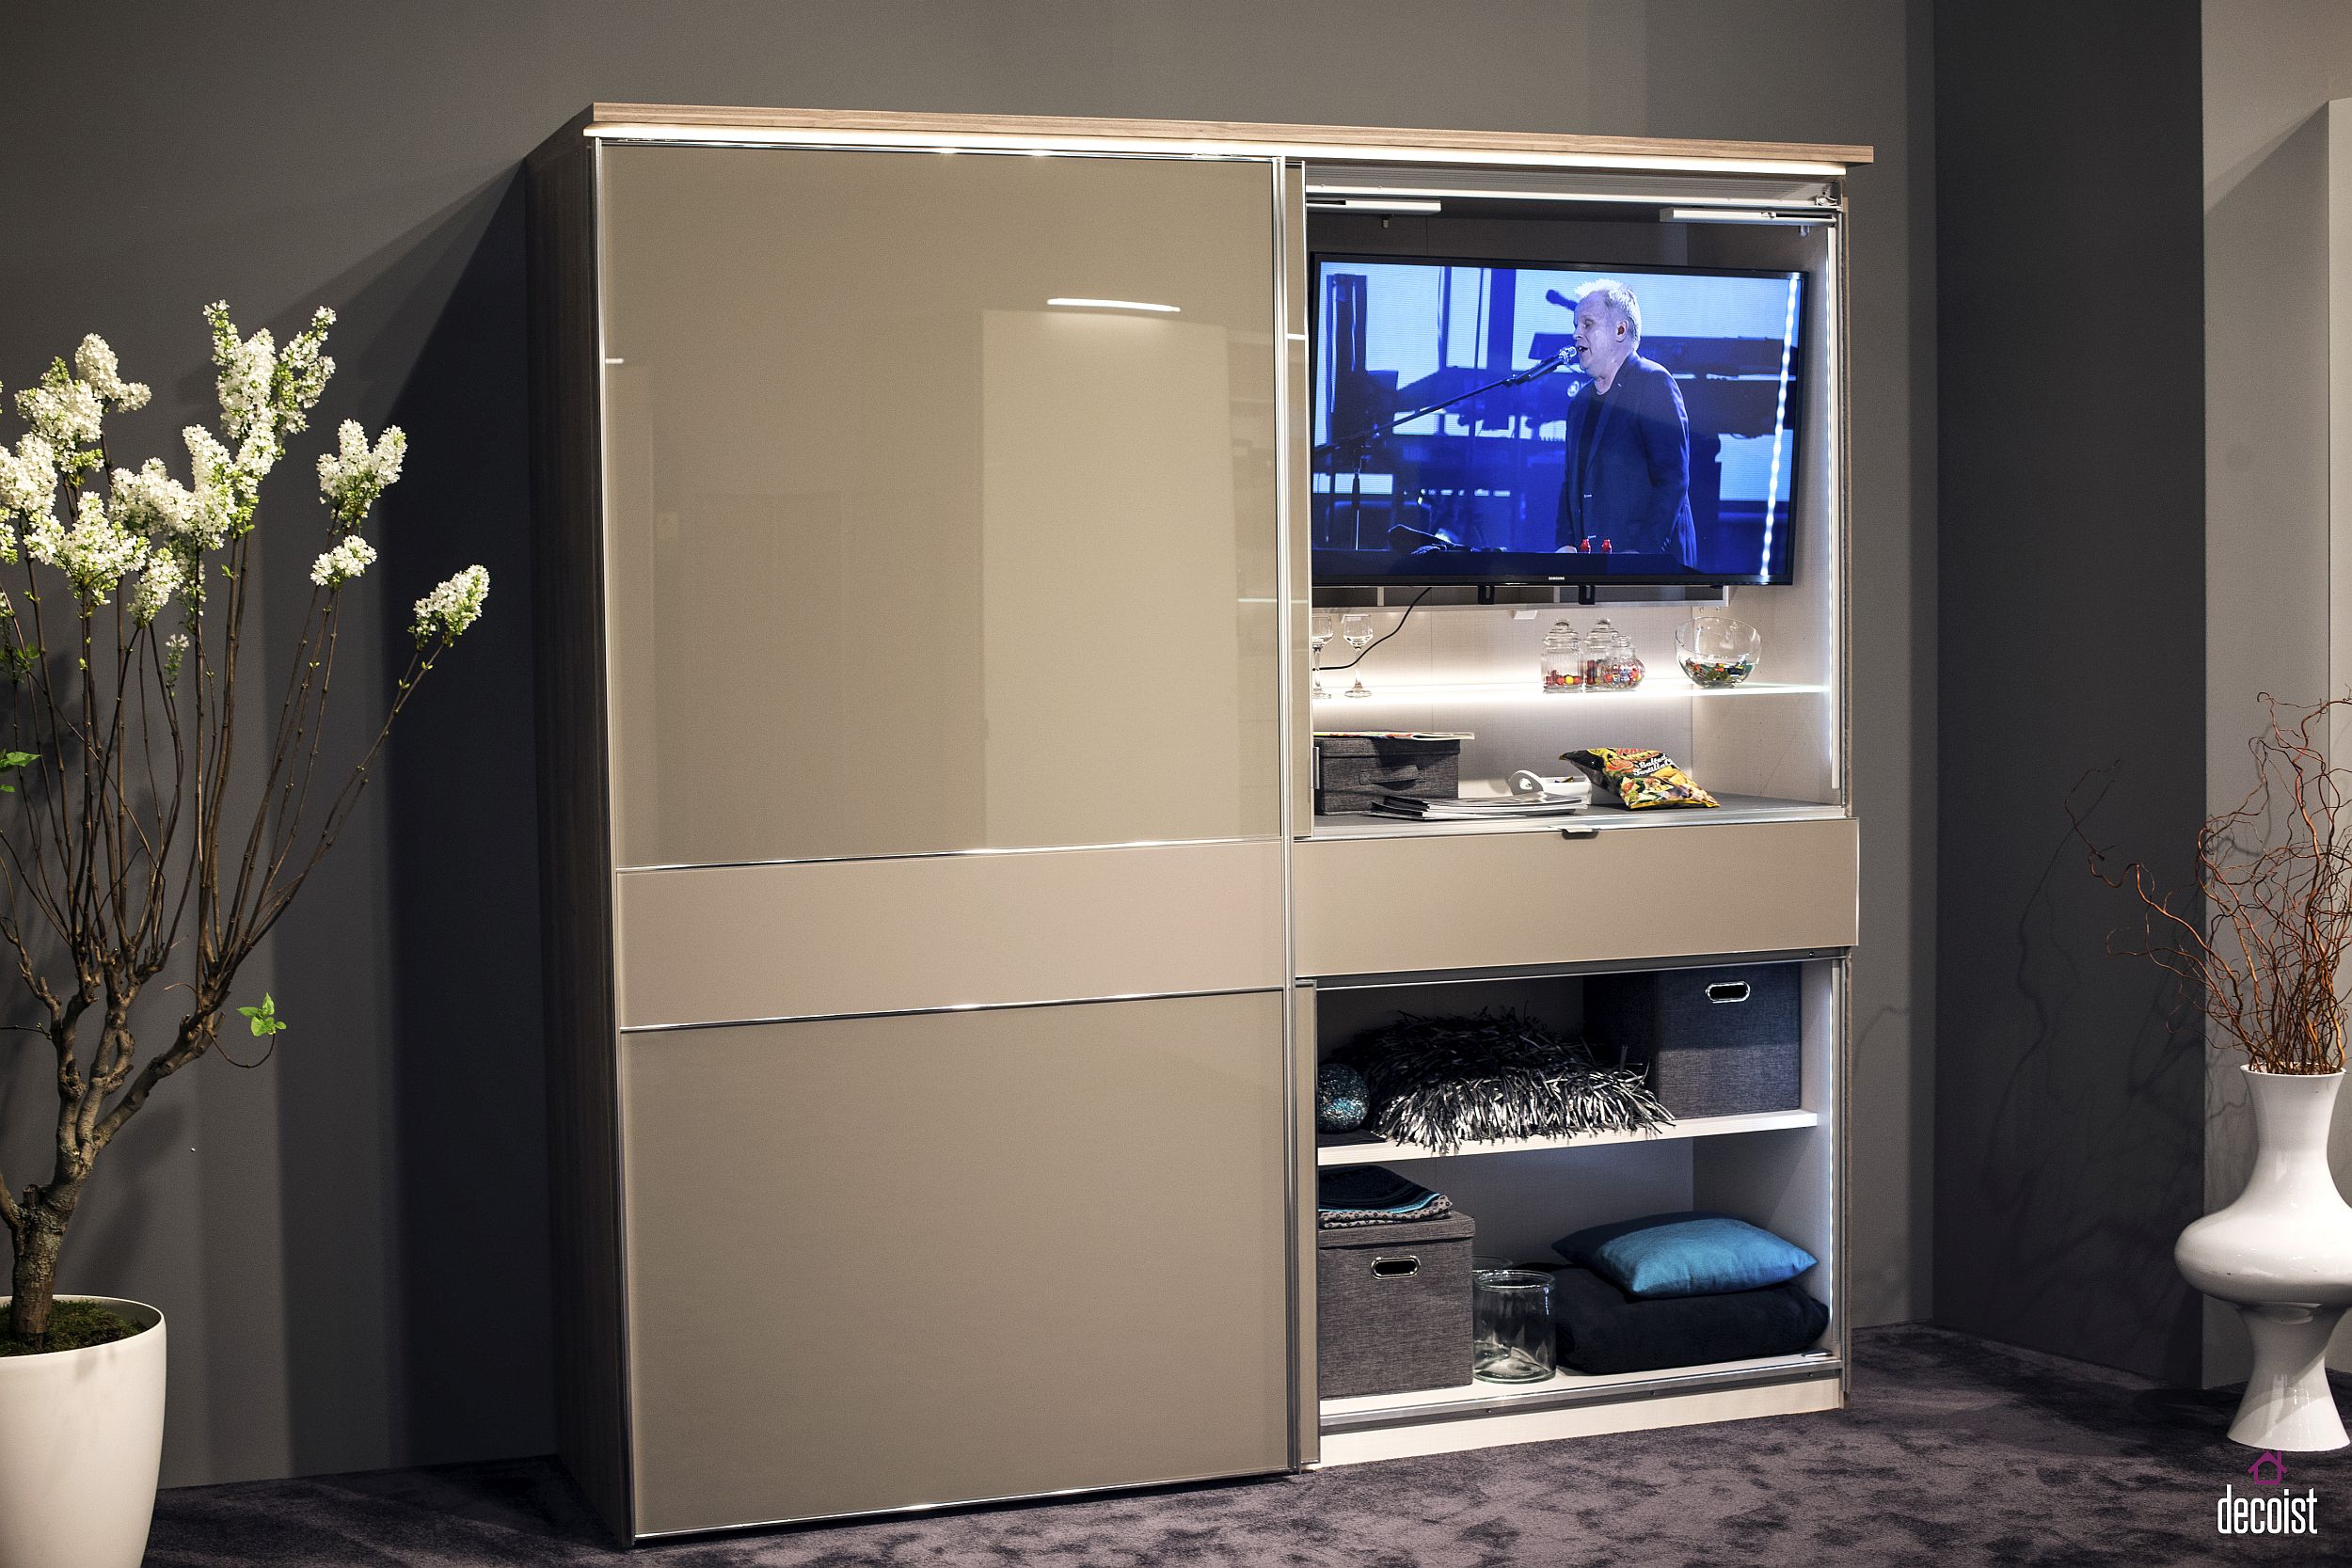 Bedroom-wardrobe-and-TV-stand-combined-into-one